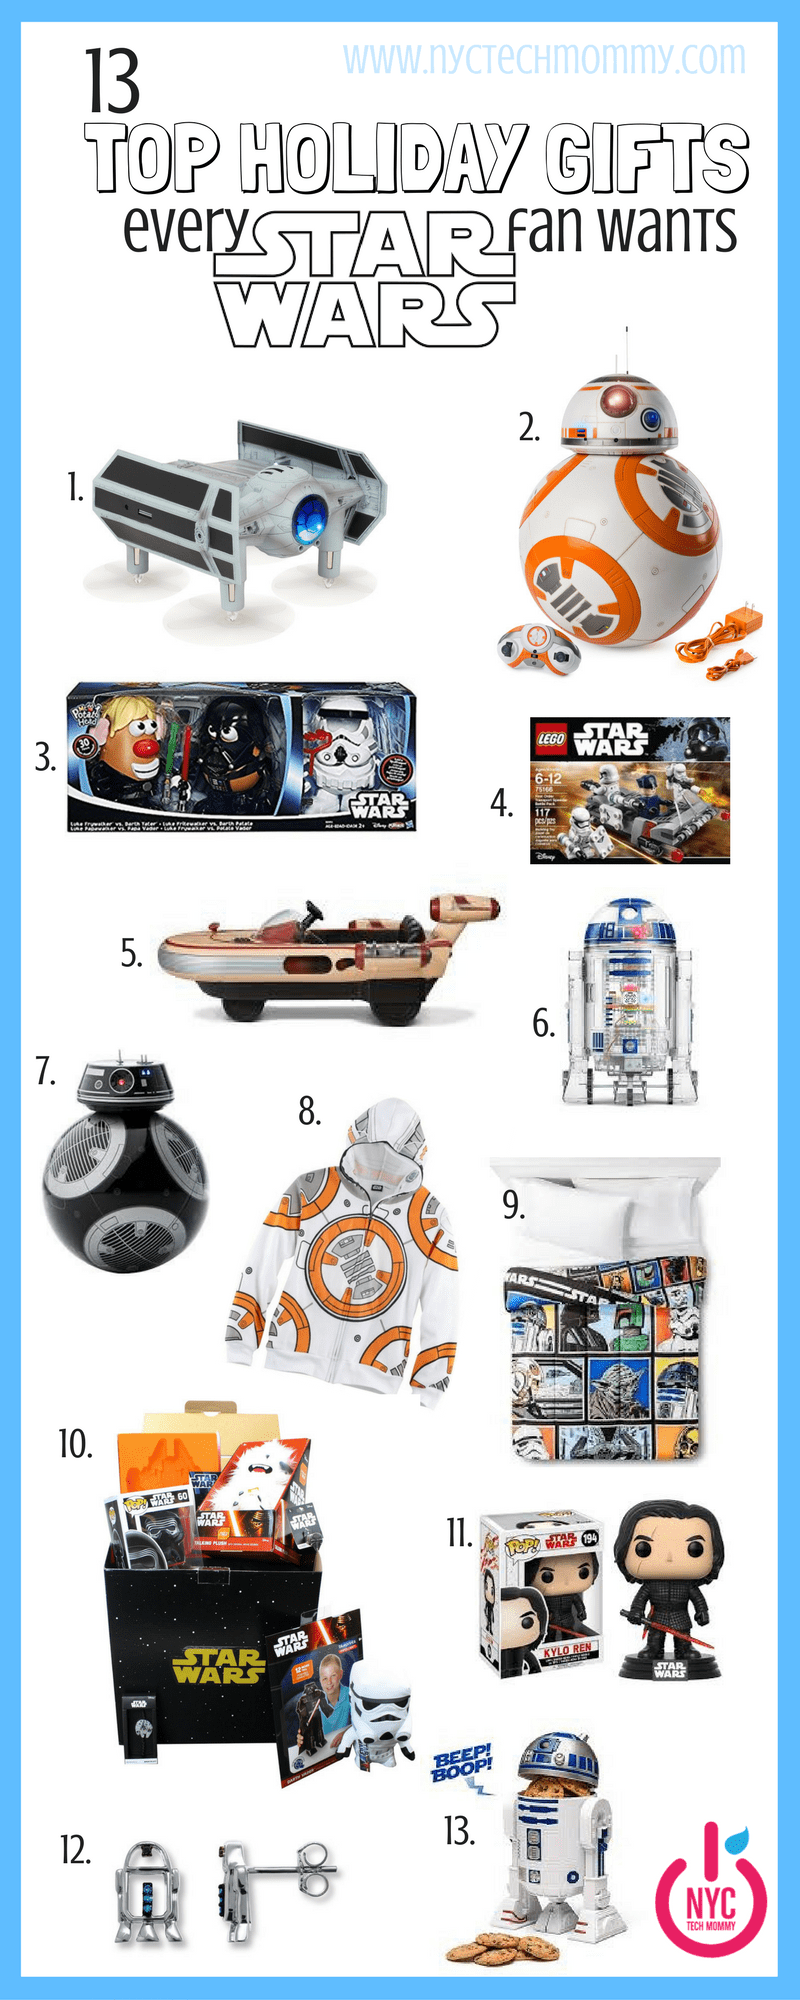 10 Awesome Gifts for Star Wars Fans - Fantha Tracks